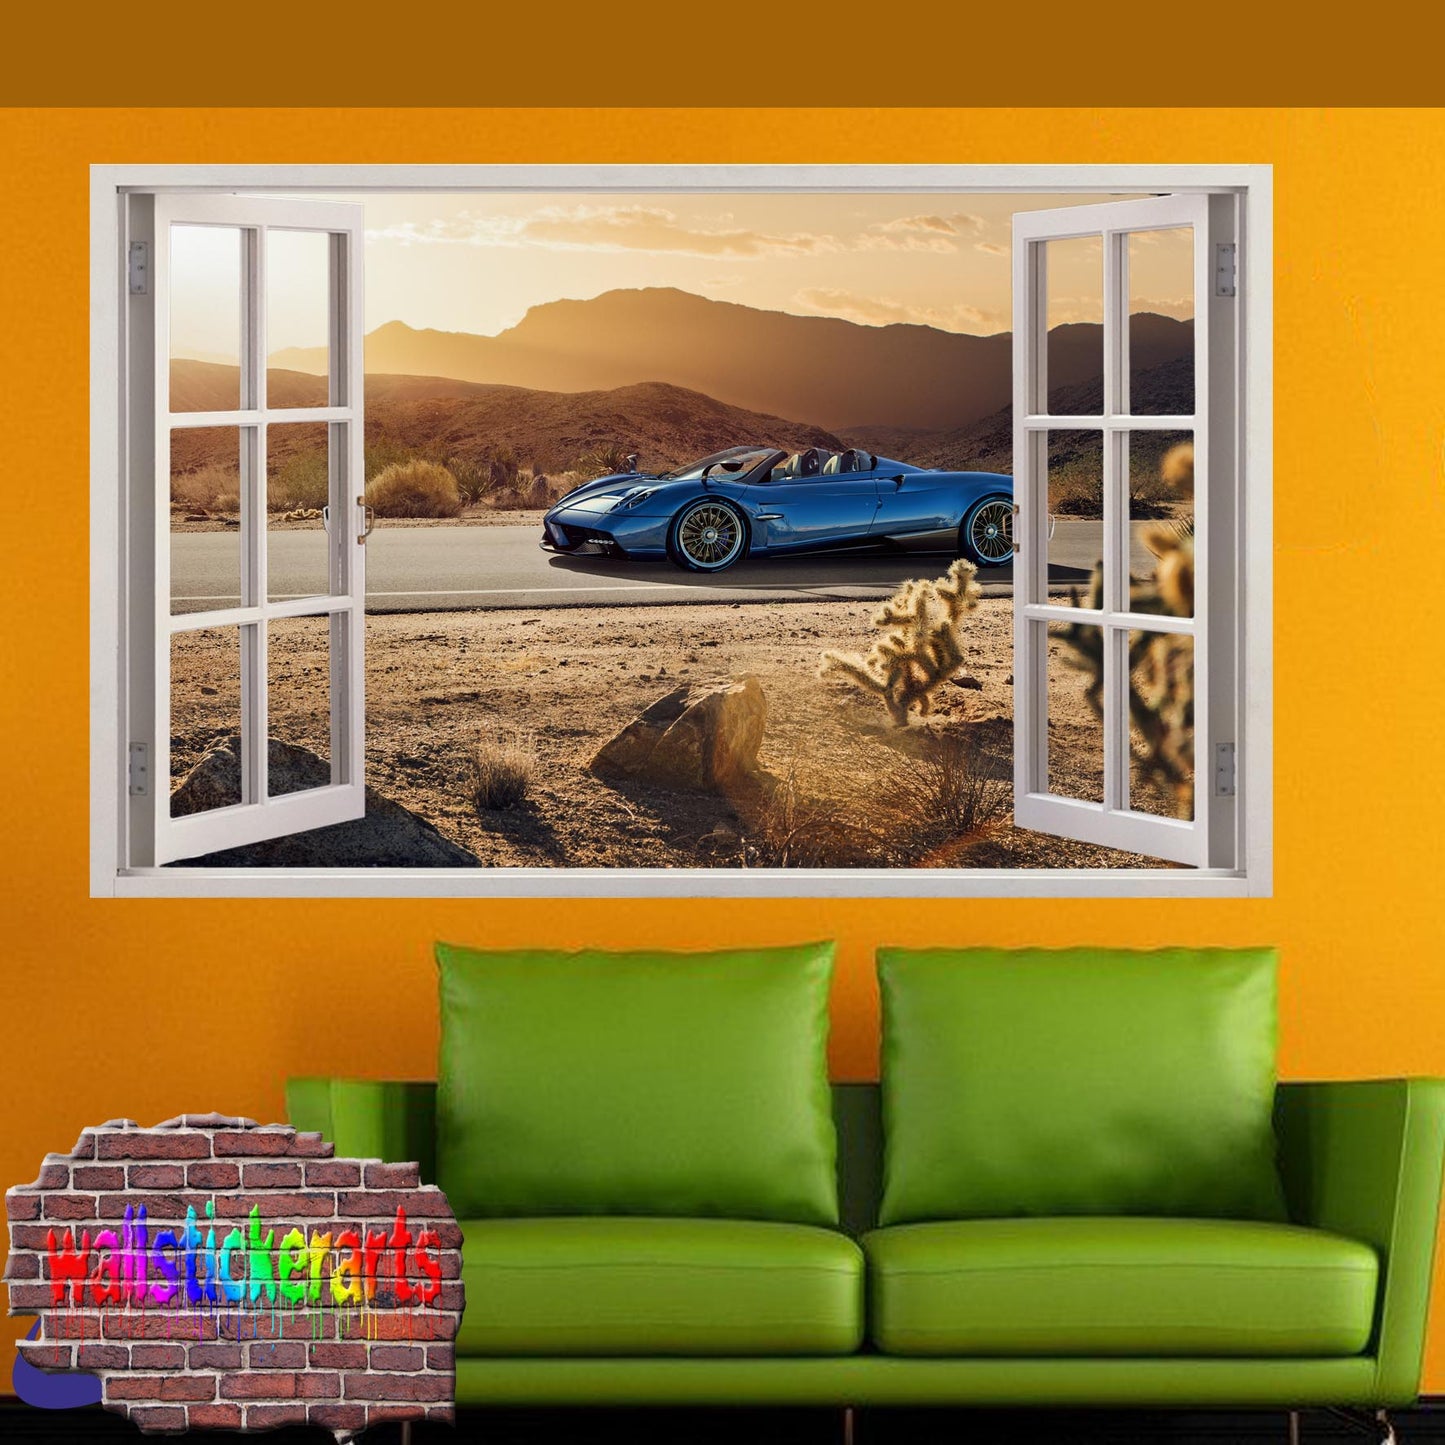 PAGANI WALL STICKER mural decal poster